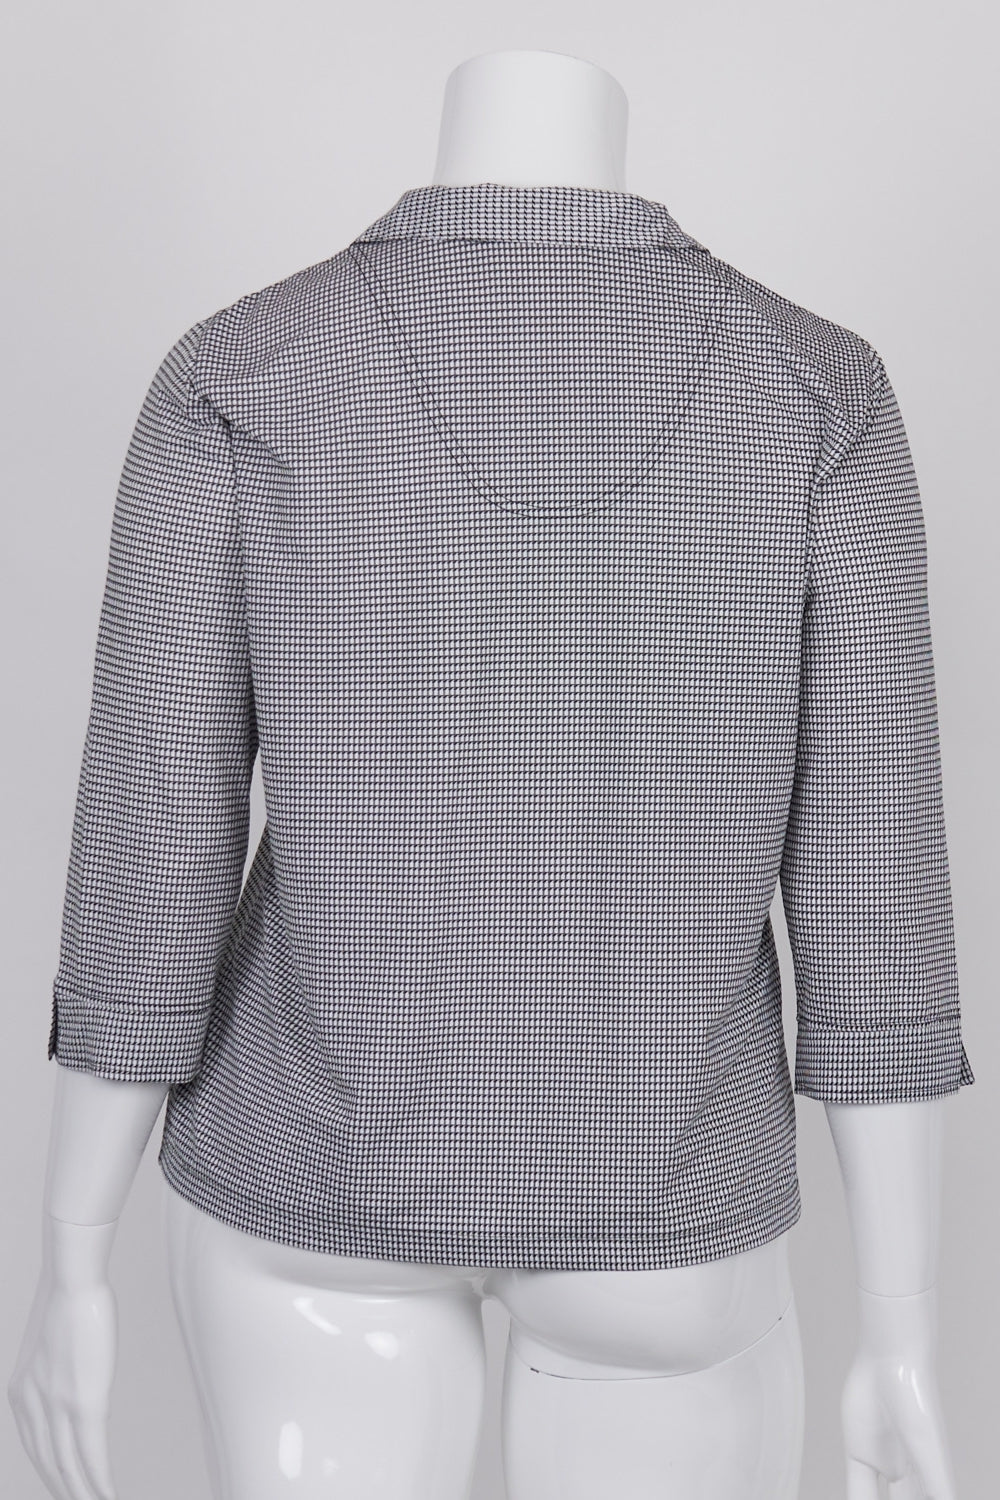 Sport Haley Black and White Patterned Long Sleeve Top XXL